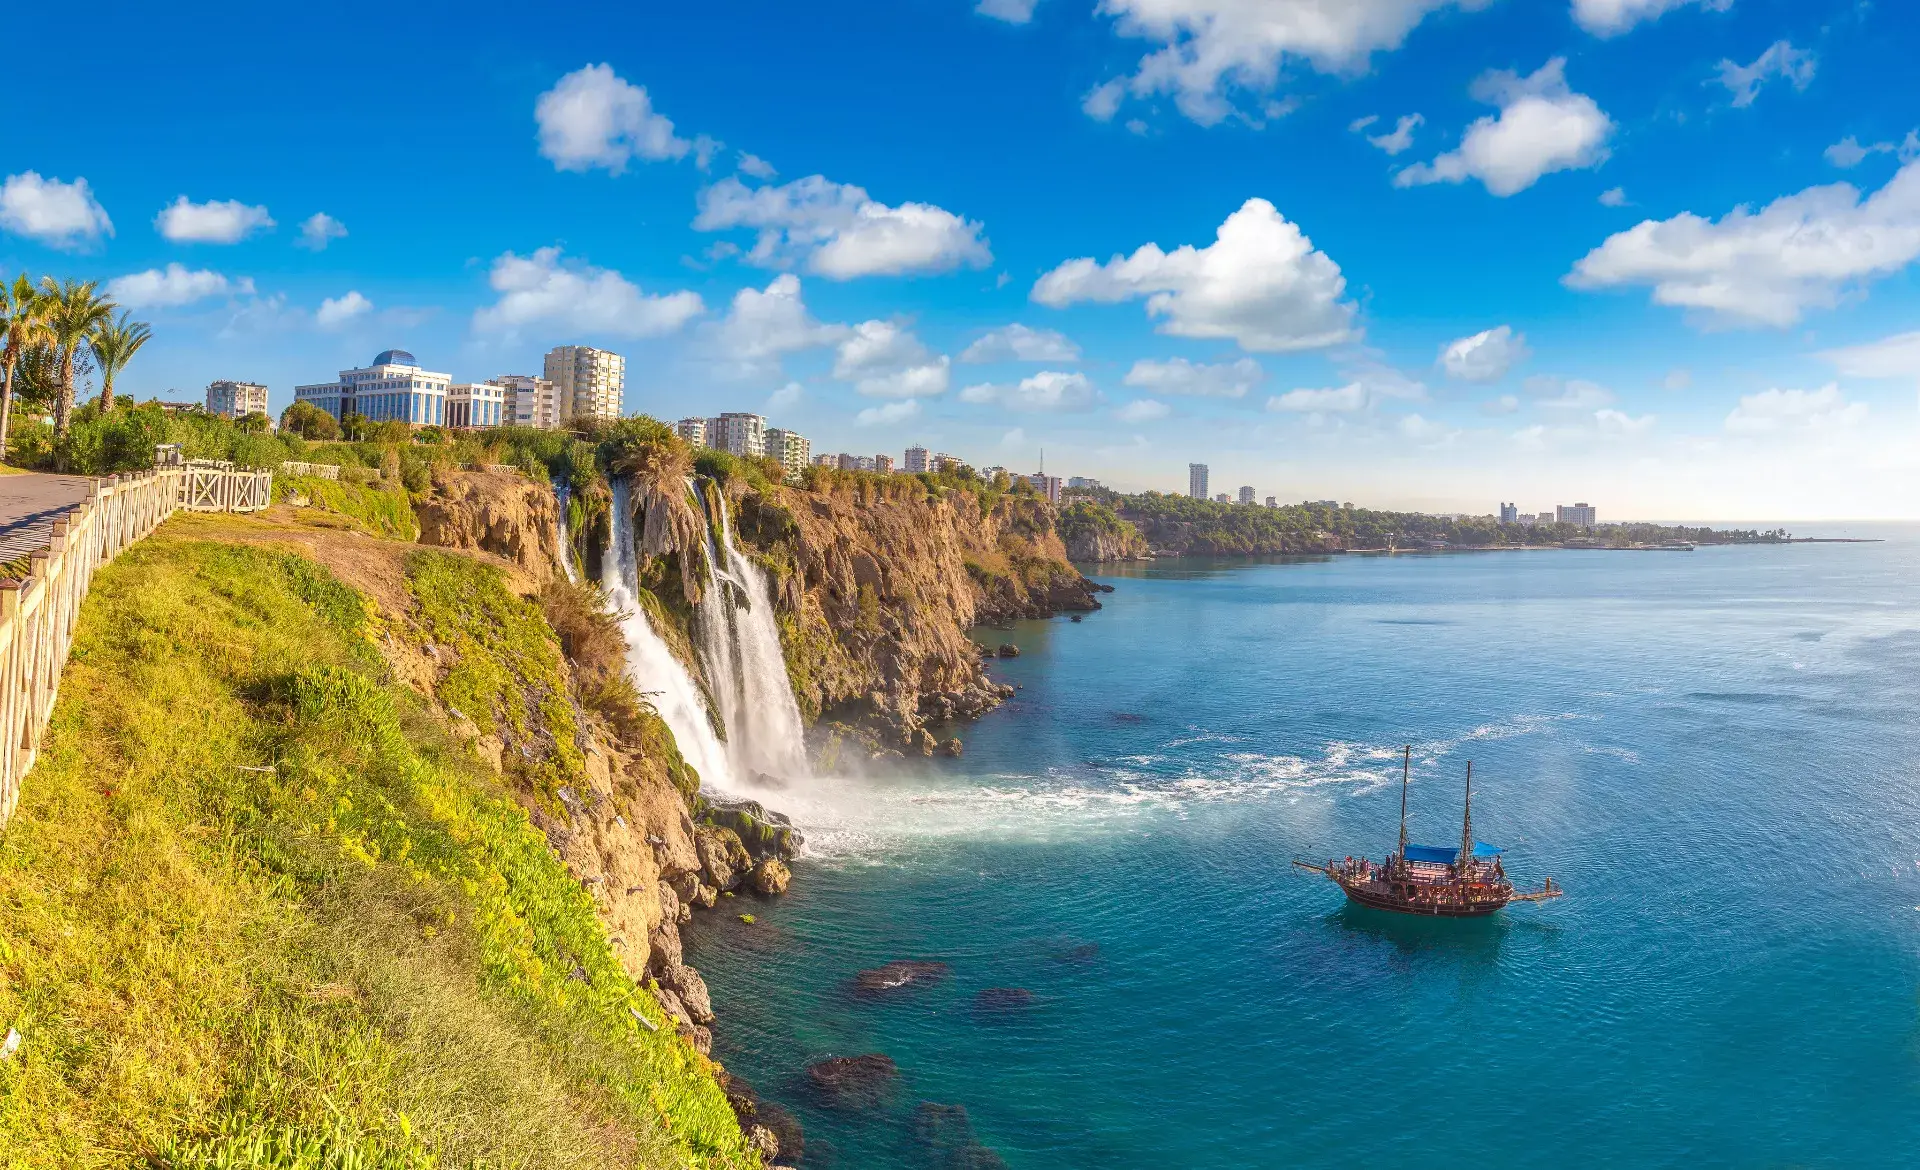 Weekend Escape Route: Where to Go ın Antalya and Its Surroundıngs